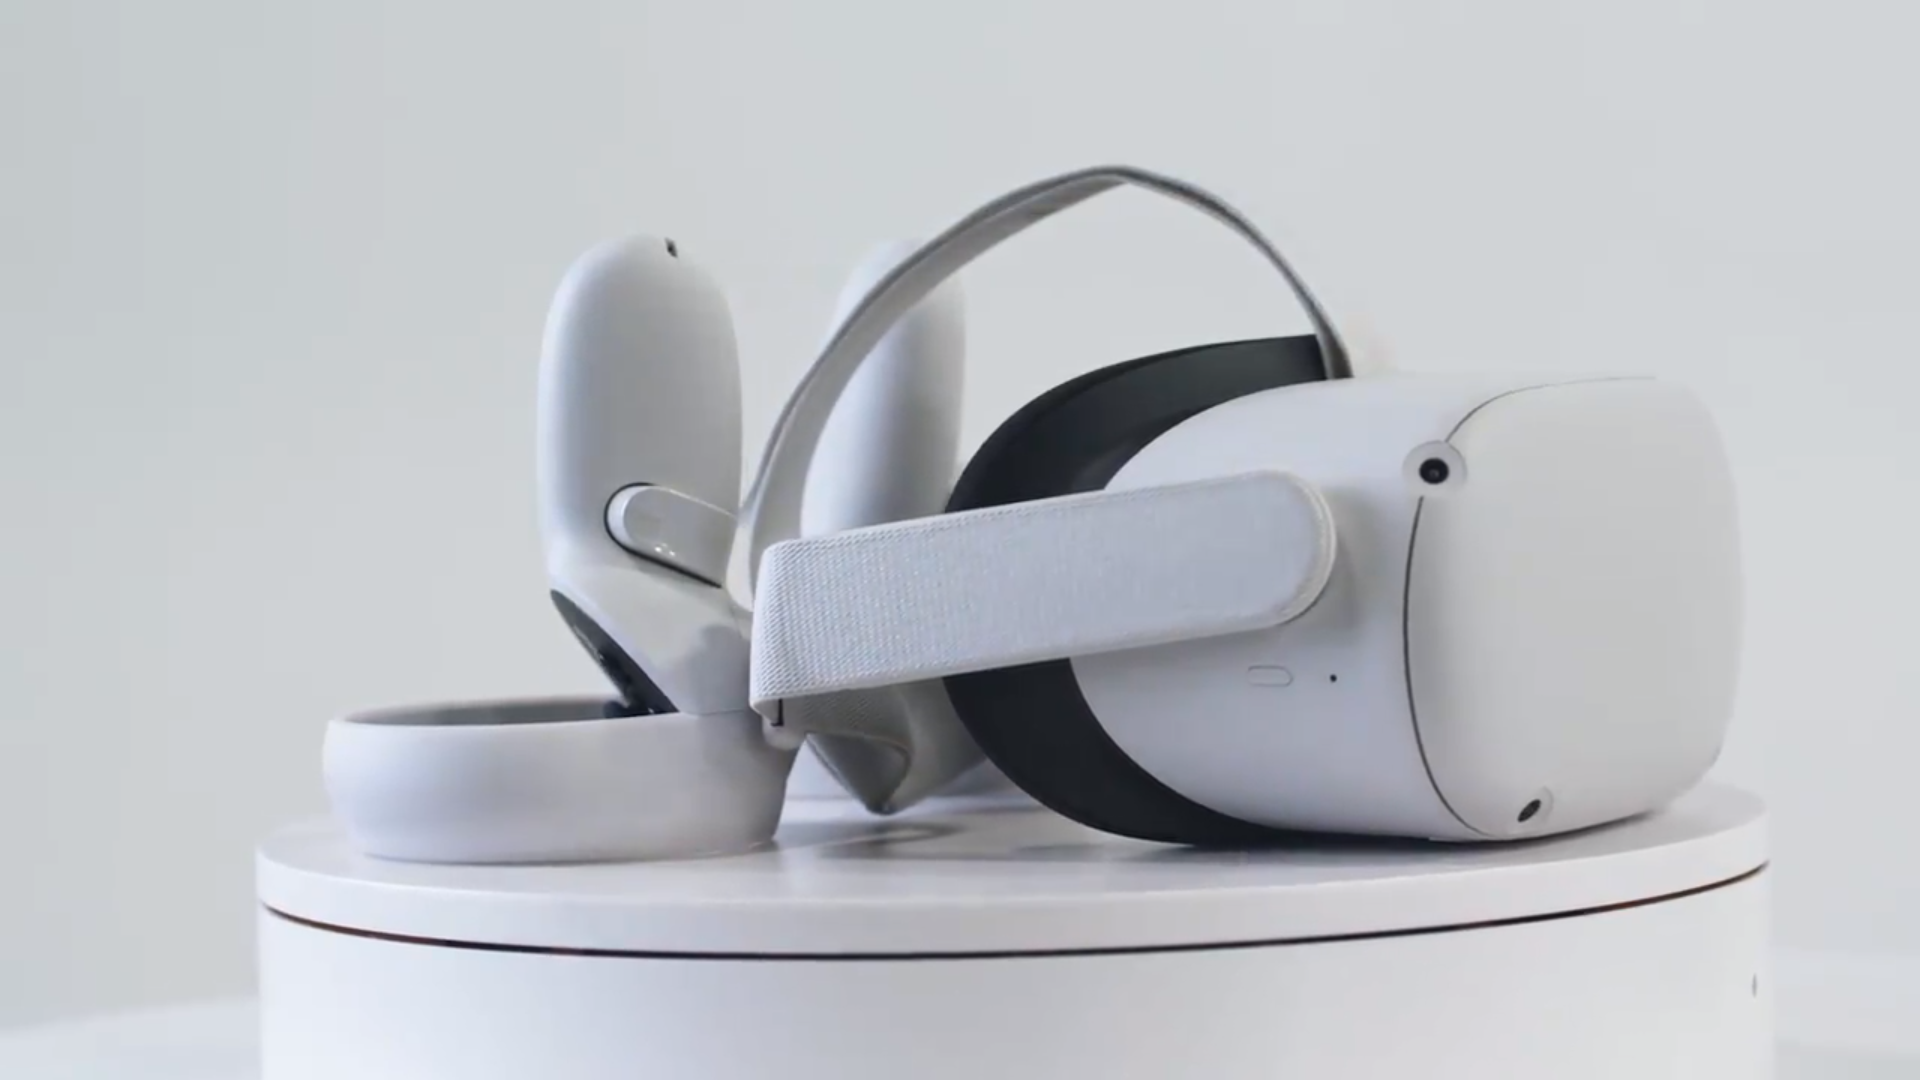 Oculus Air Link Lets You Wirelessly Circulation VR Games to the Quest 2